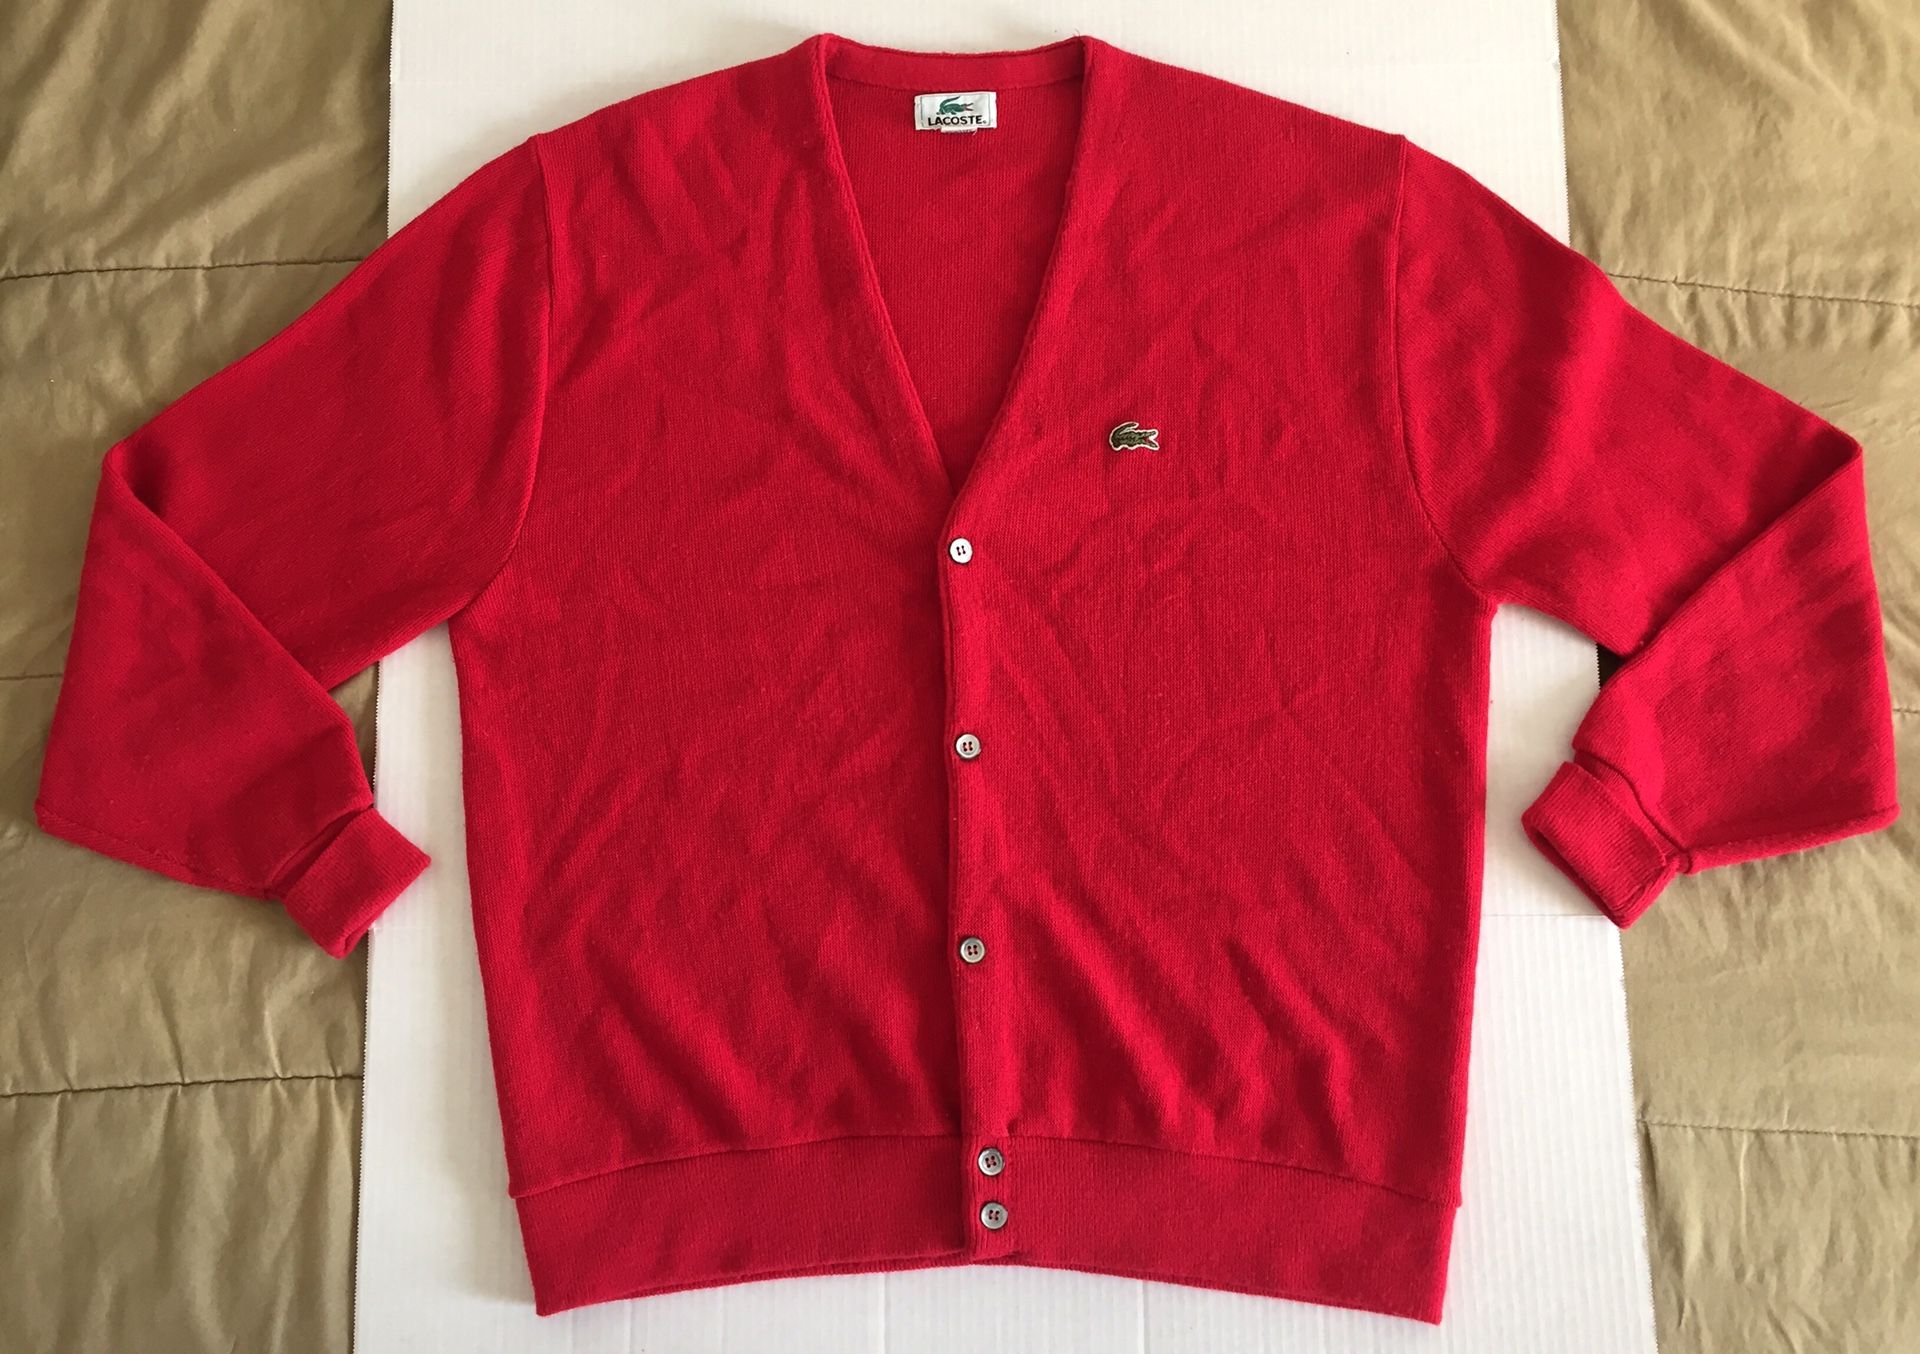 Lacoste Vintage Red Green Classic Button Knit Acrylic Cardigan Sweater Mens Sz XL